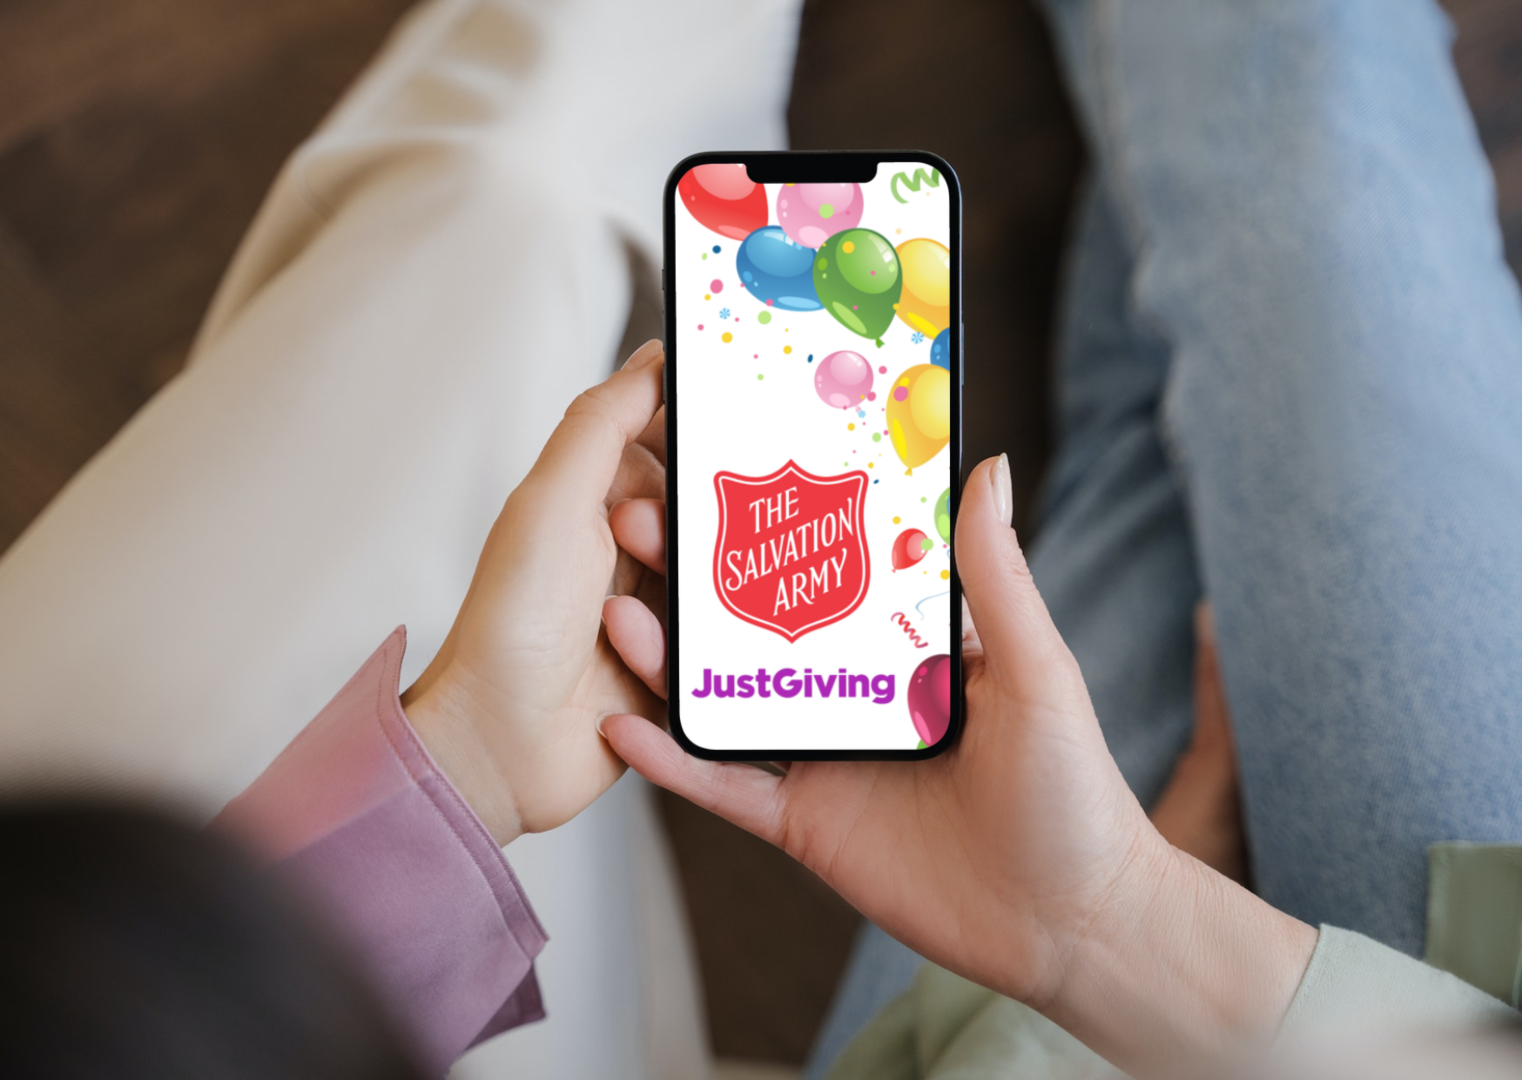 JustGiving and Salvation Army logo on phone